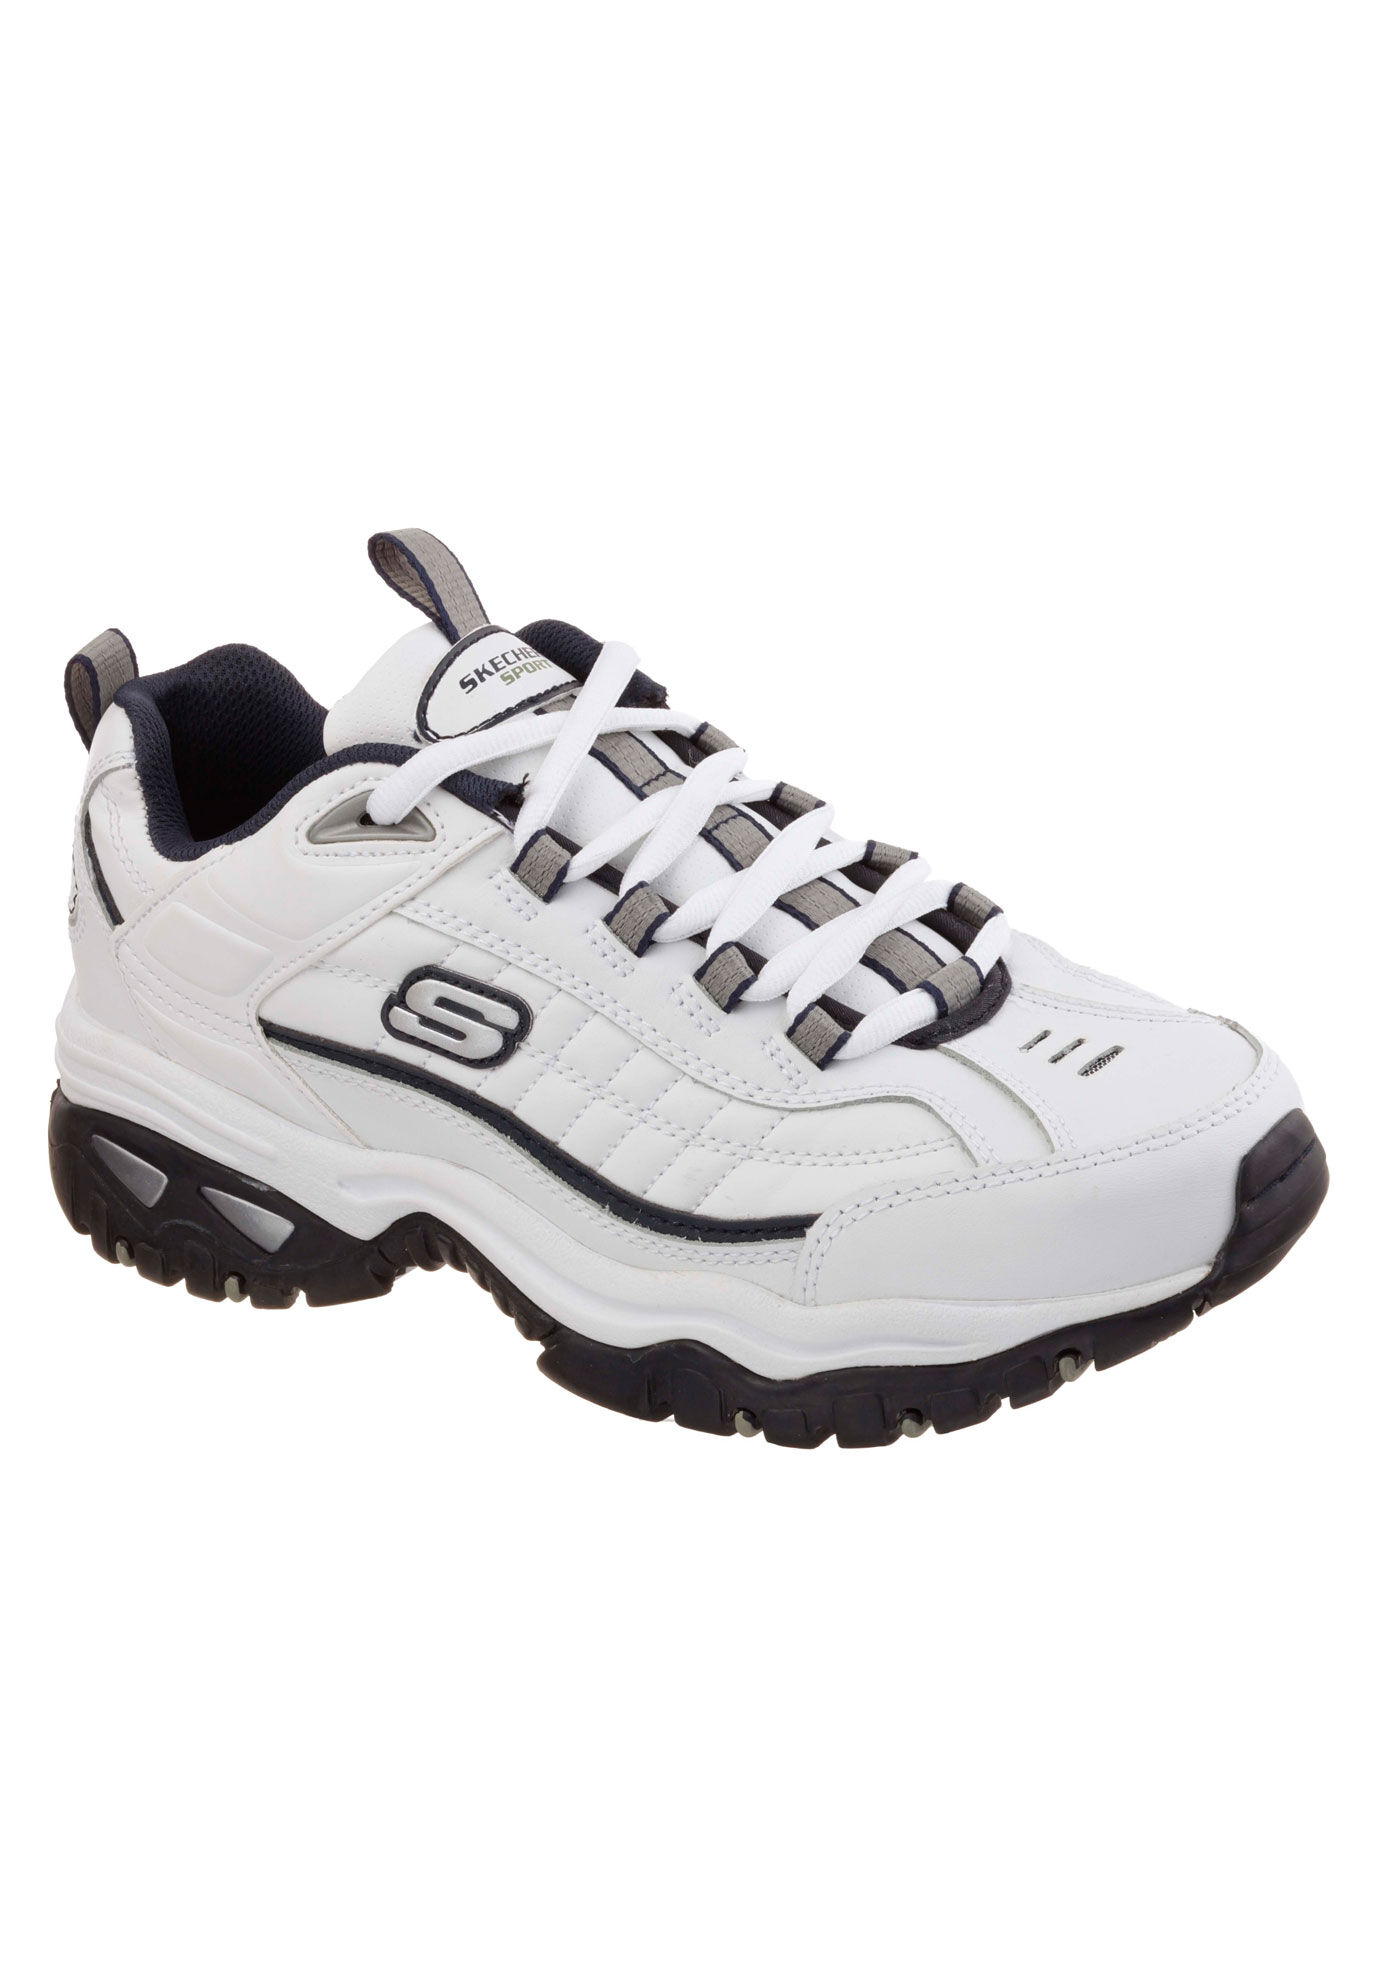 skechers big and tall